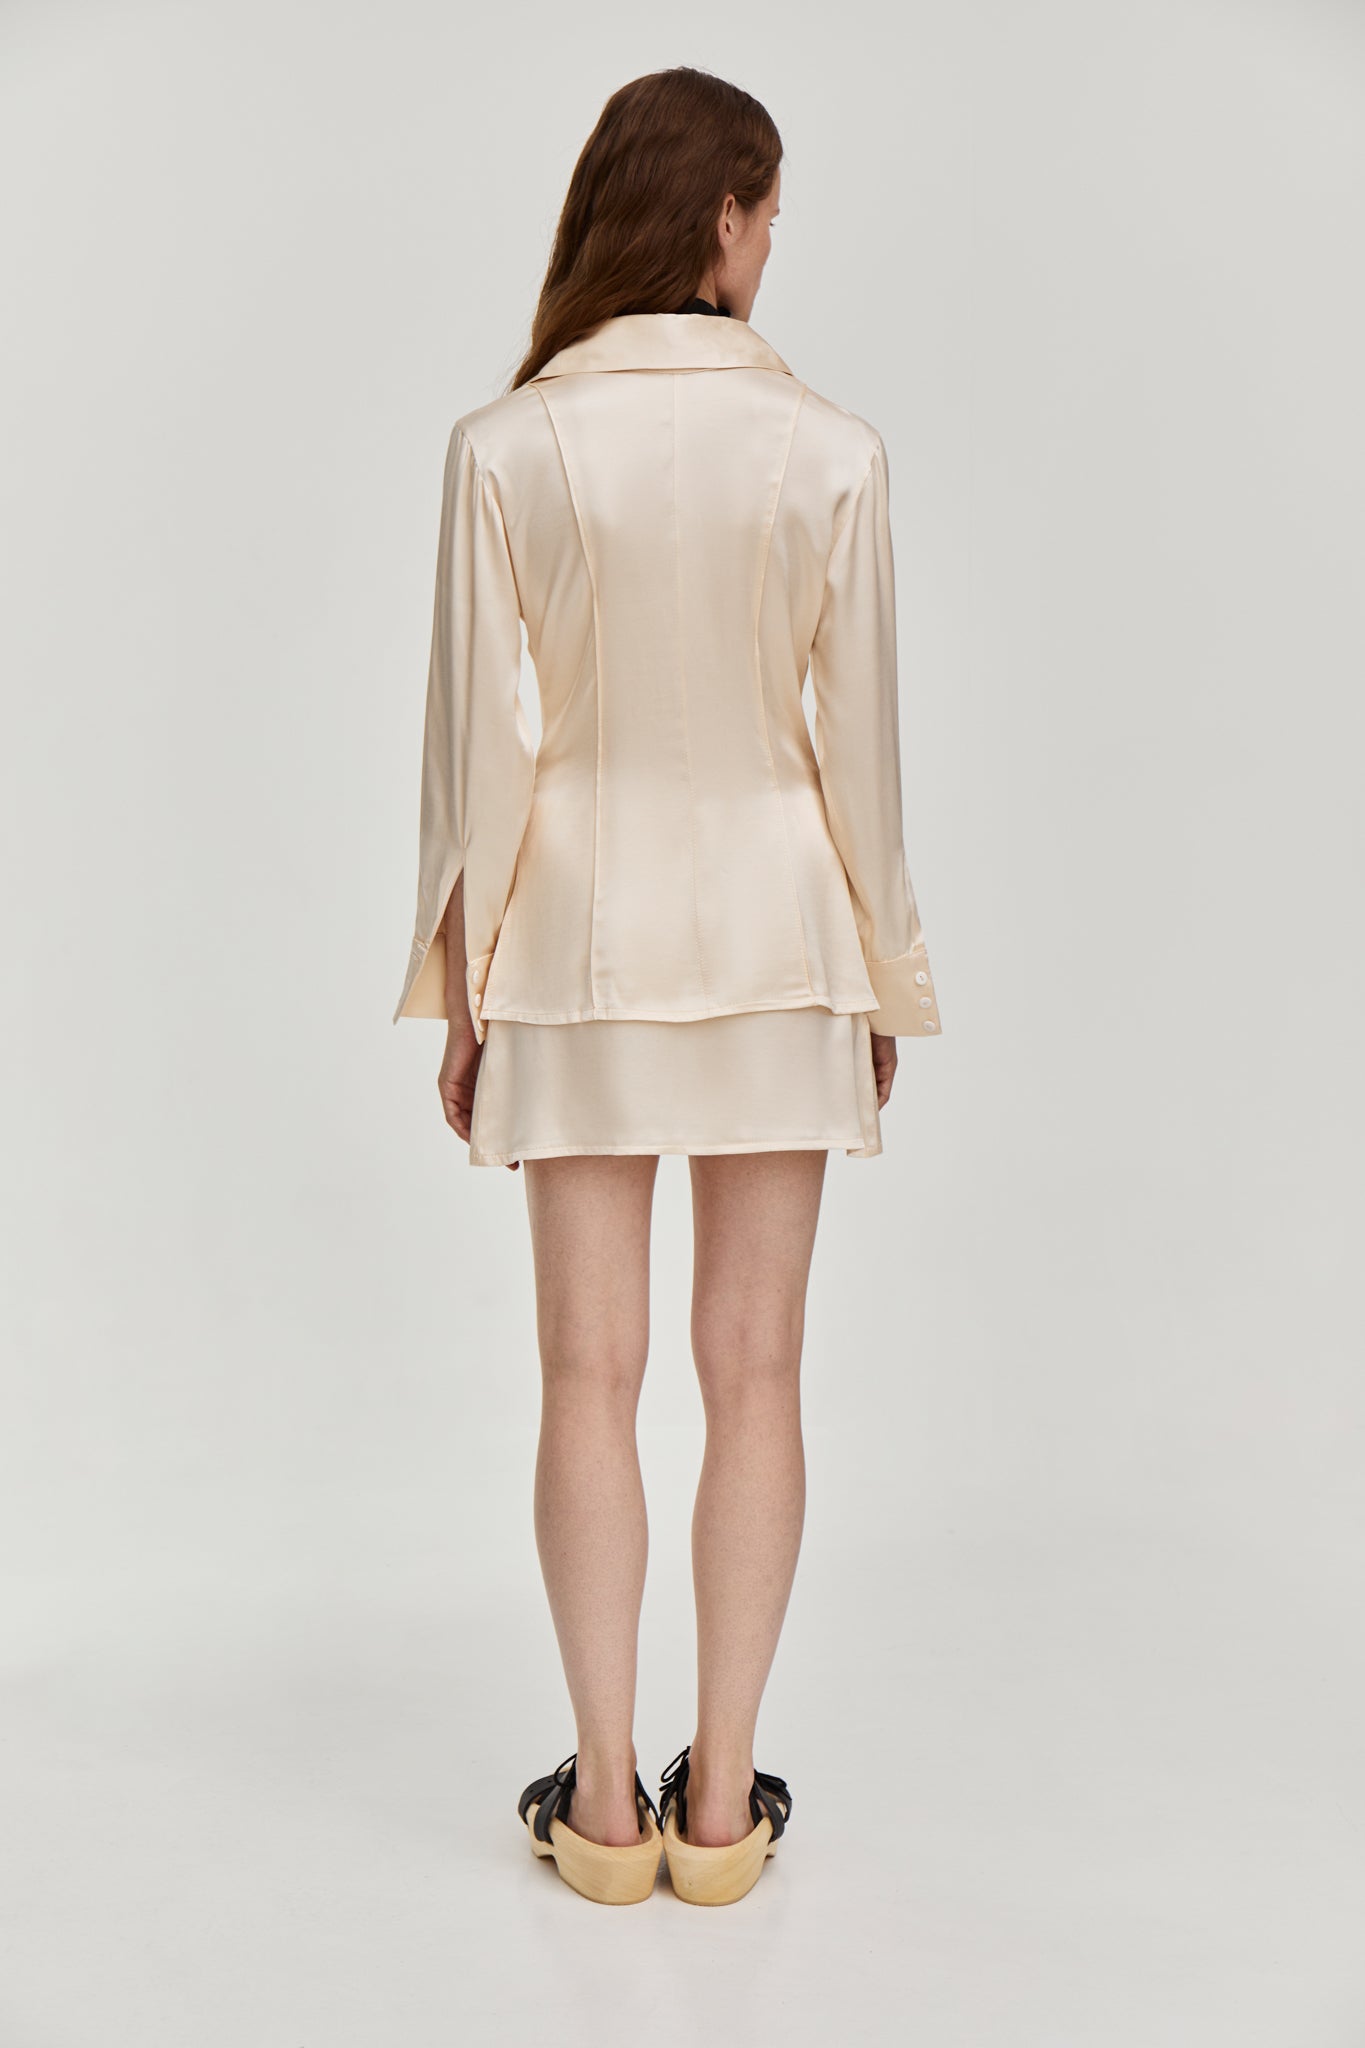 Silky viscose suit mini low waist skirt with Fitted-waist silky blouse in Creme color from FORMA brand